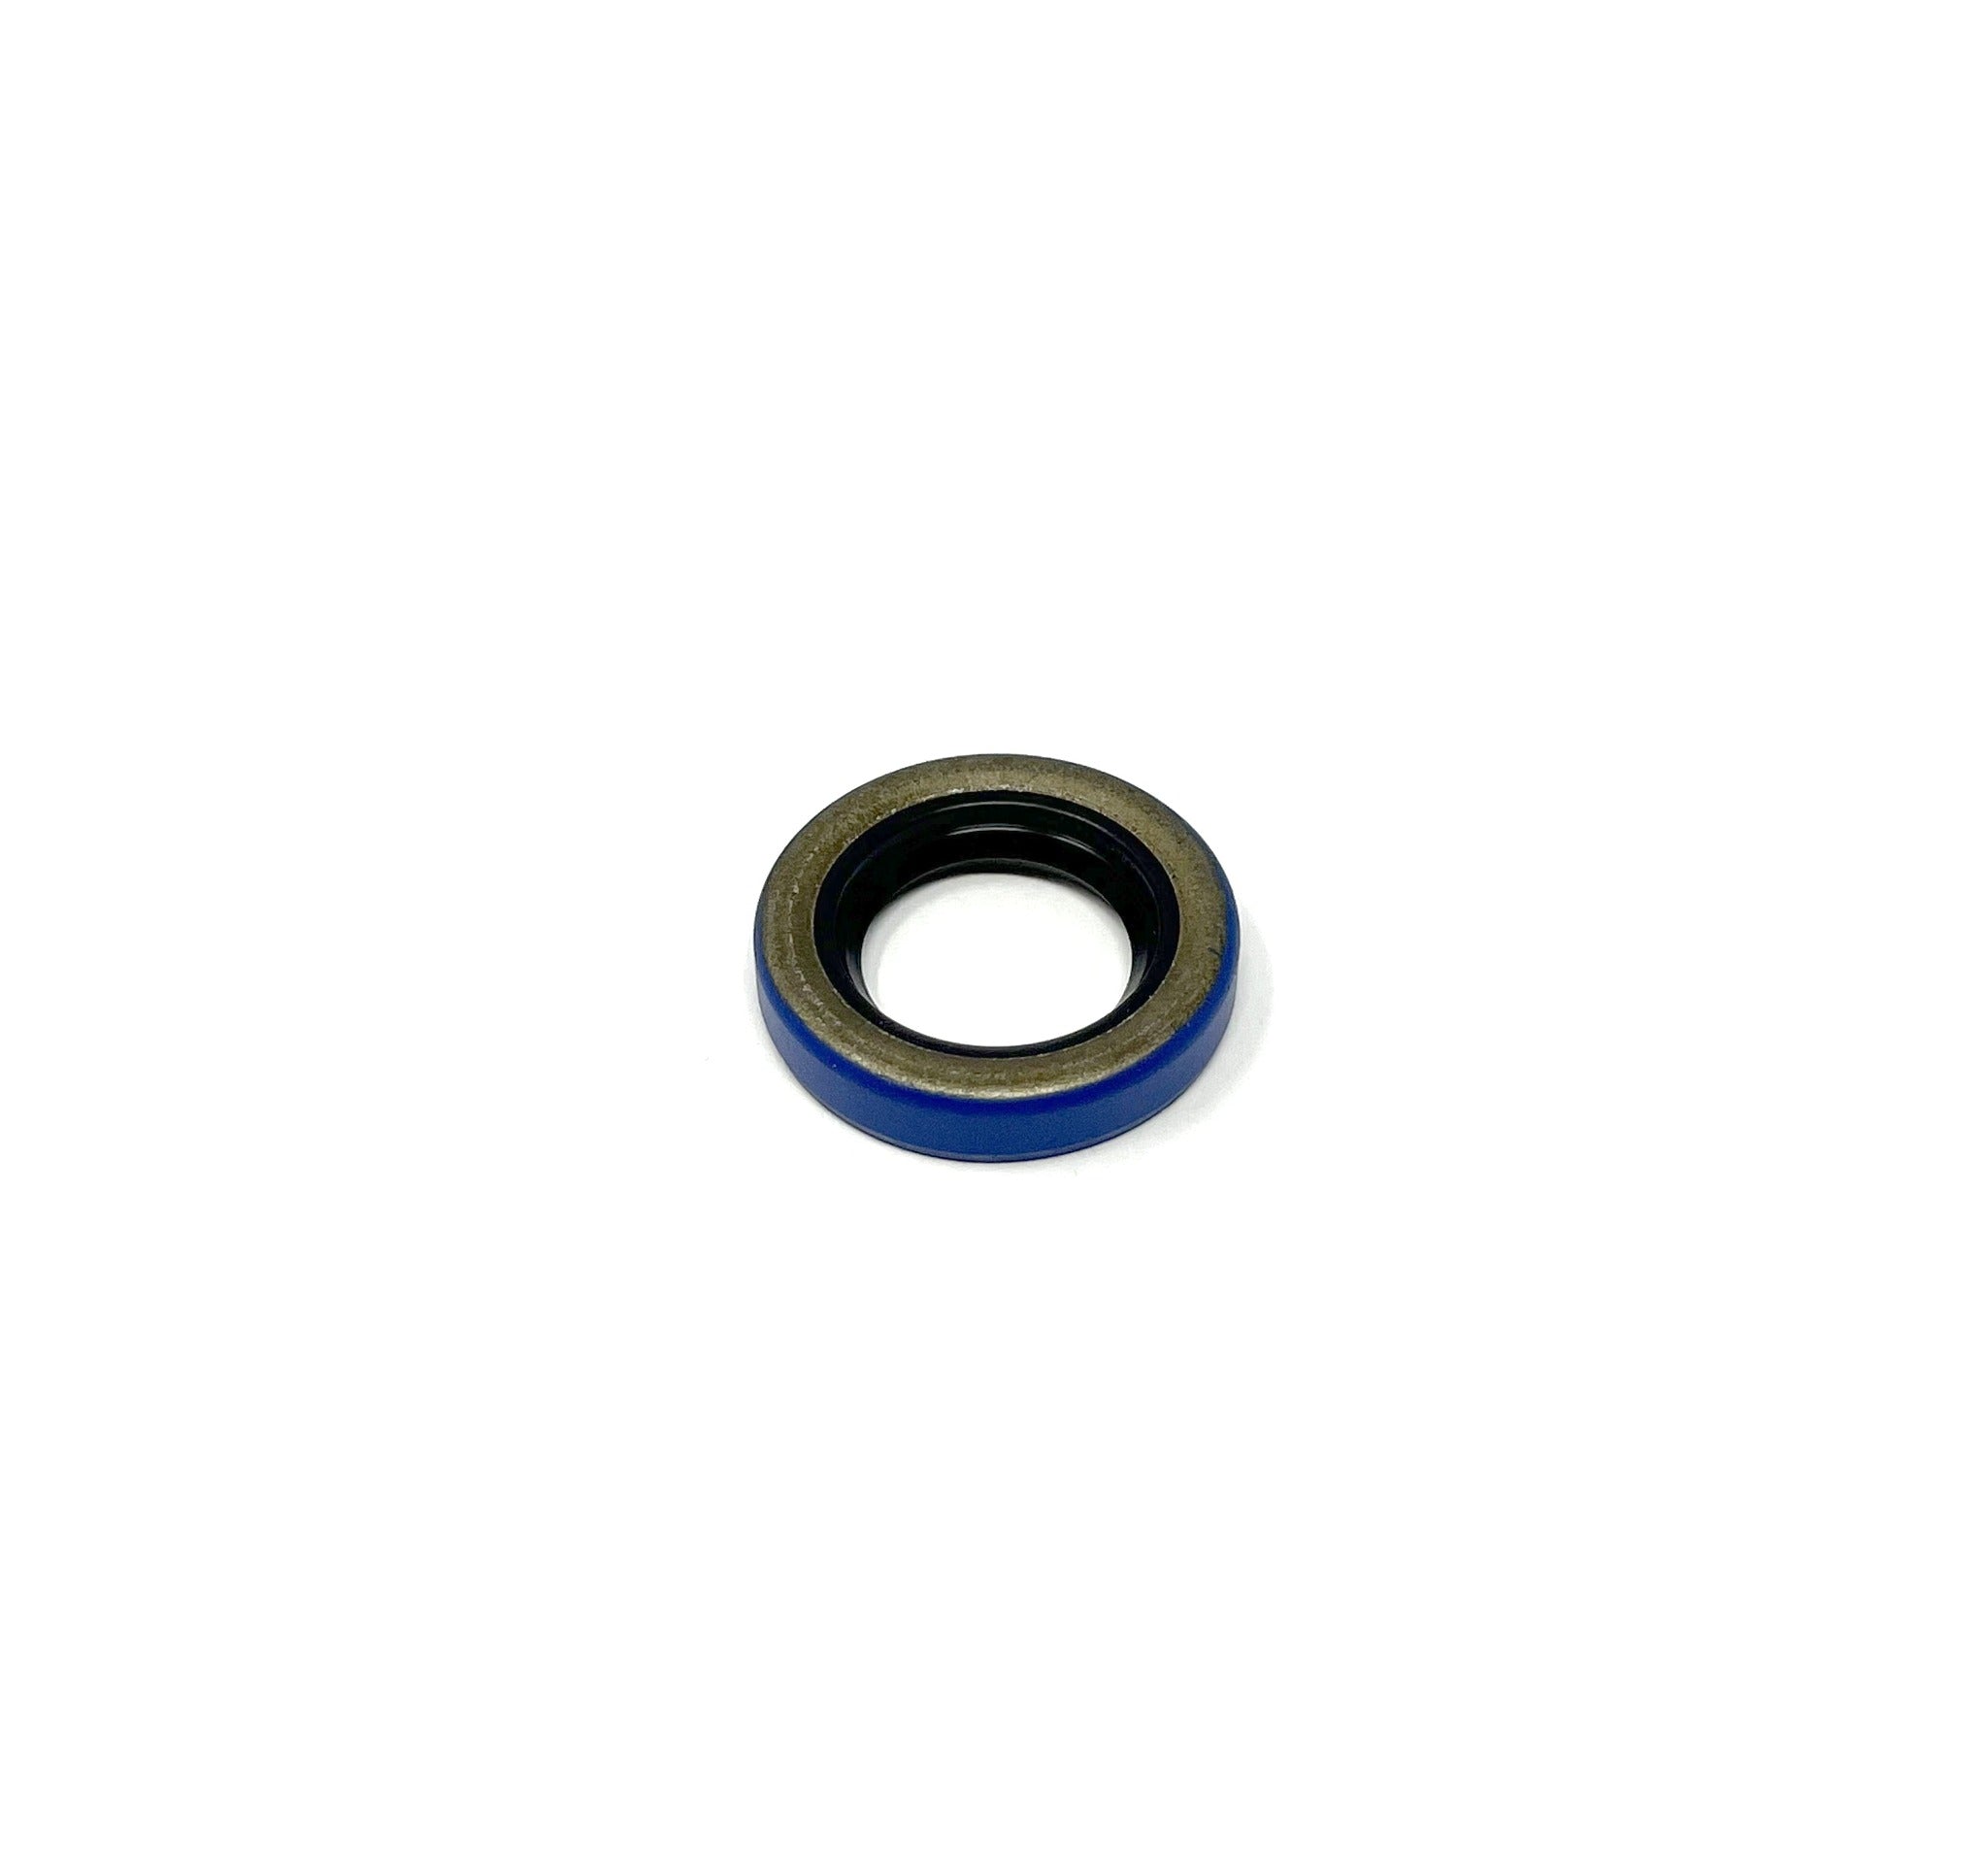 Ammco Seal (Blue)